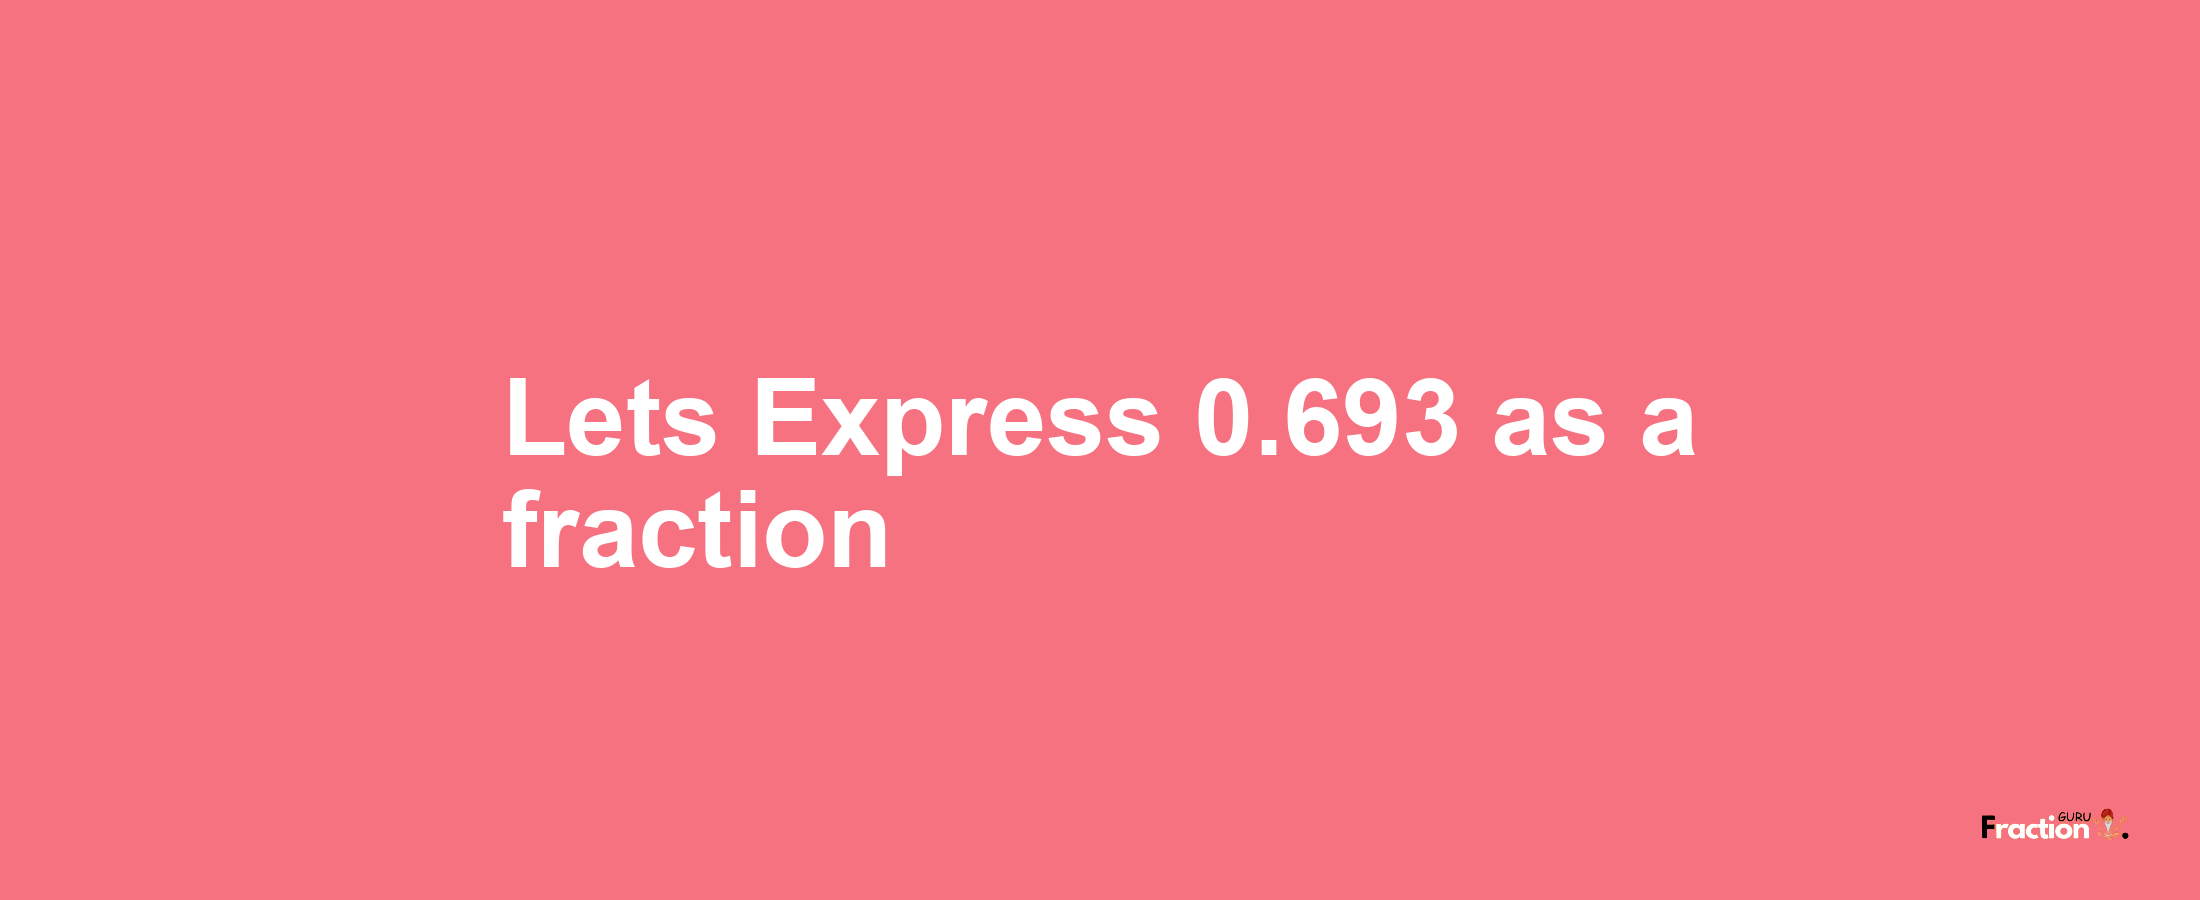 Lets Express 0.693 as afraction